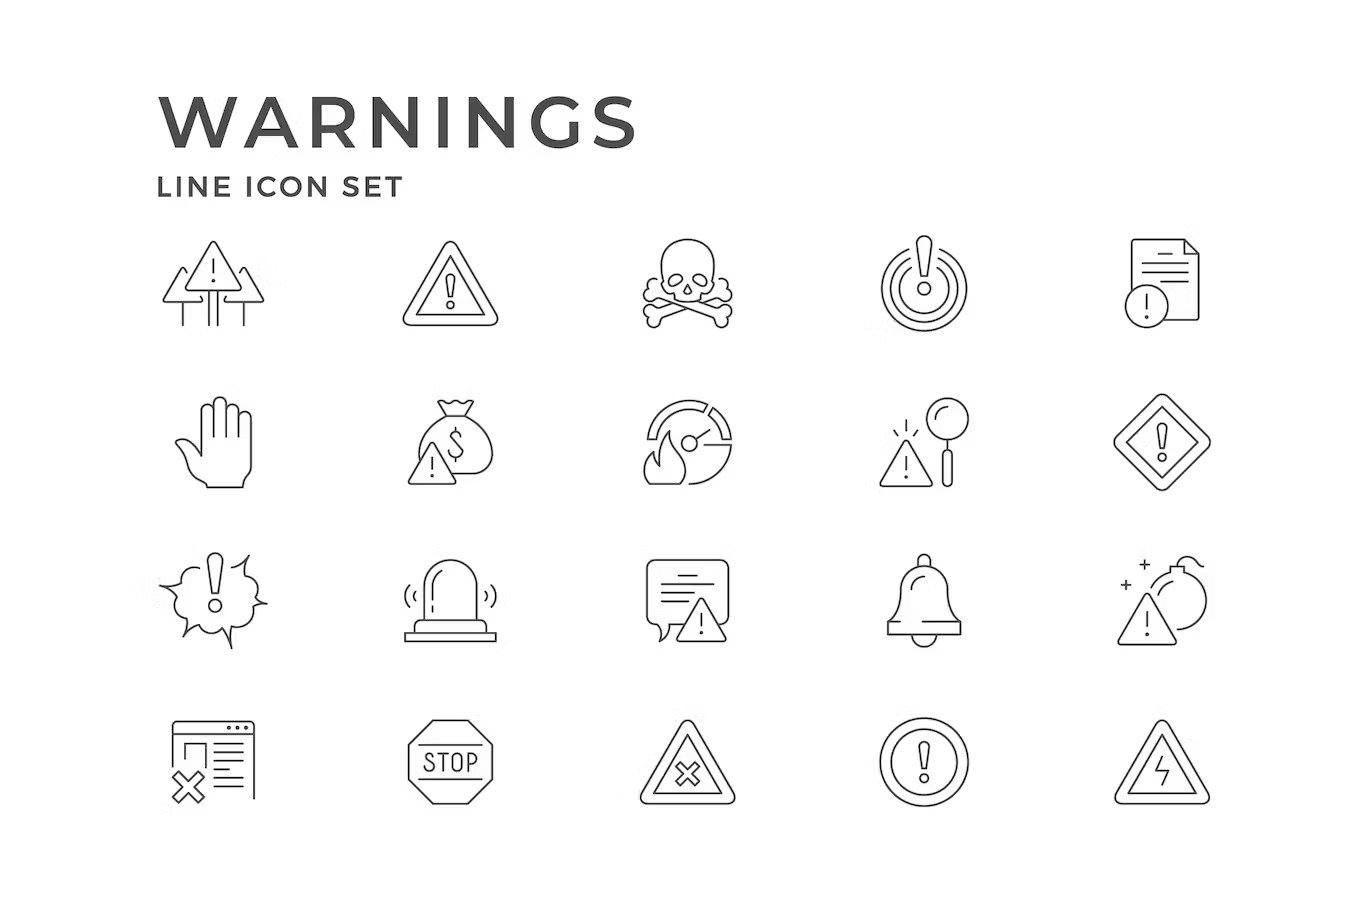 A warnings line icon set